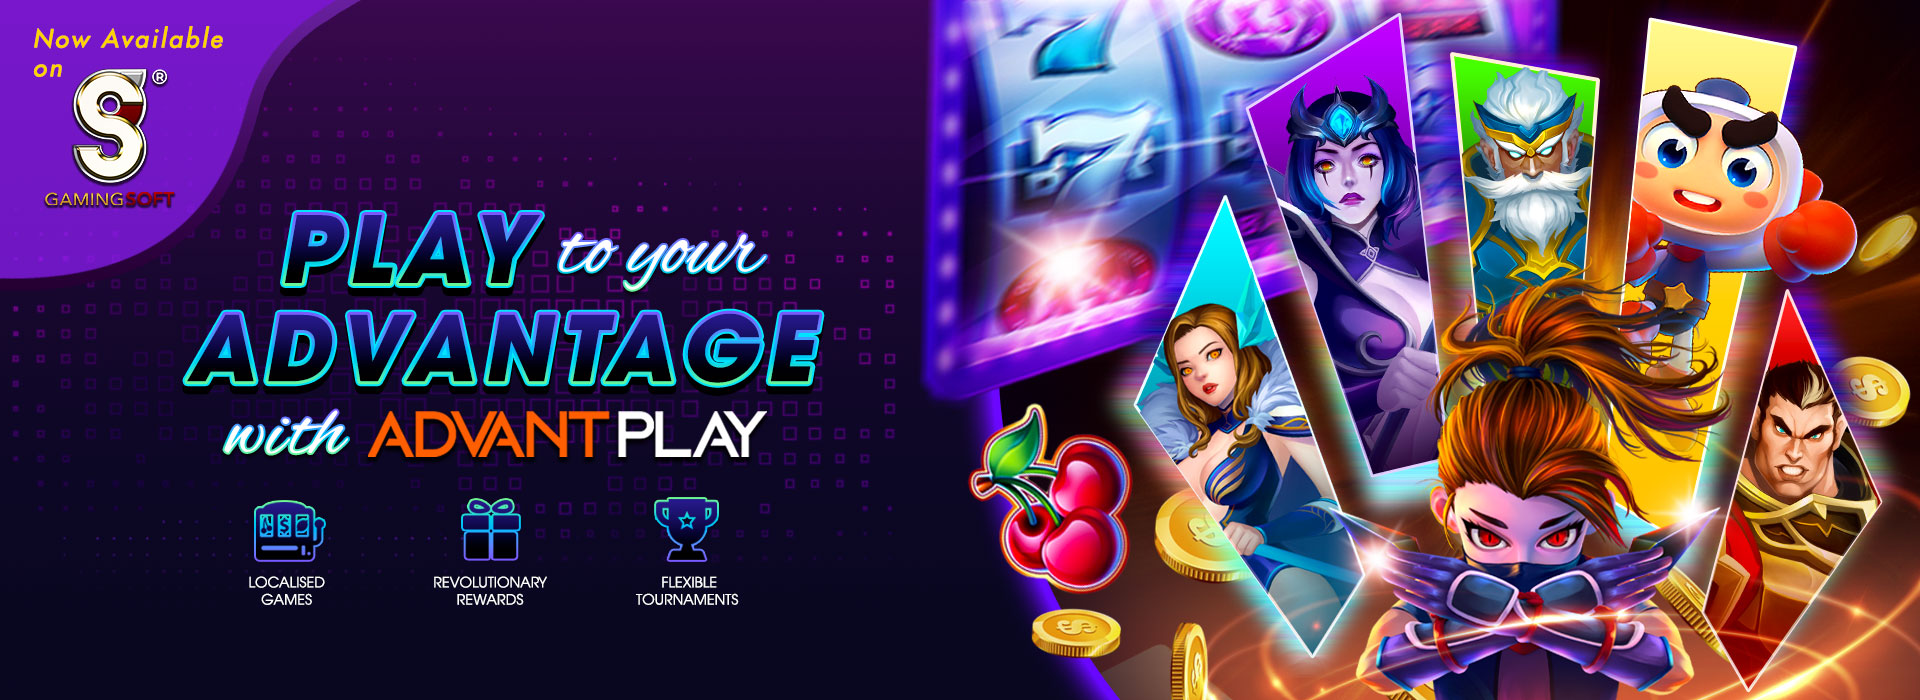 Play to your Advantage with AdvantPlay Web Banner - GamingSoft